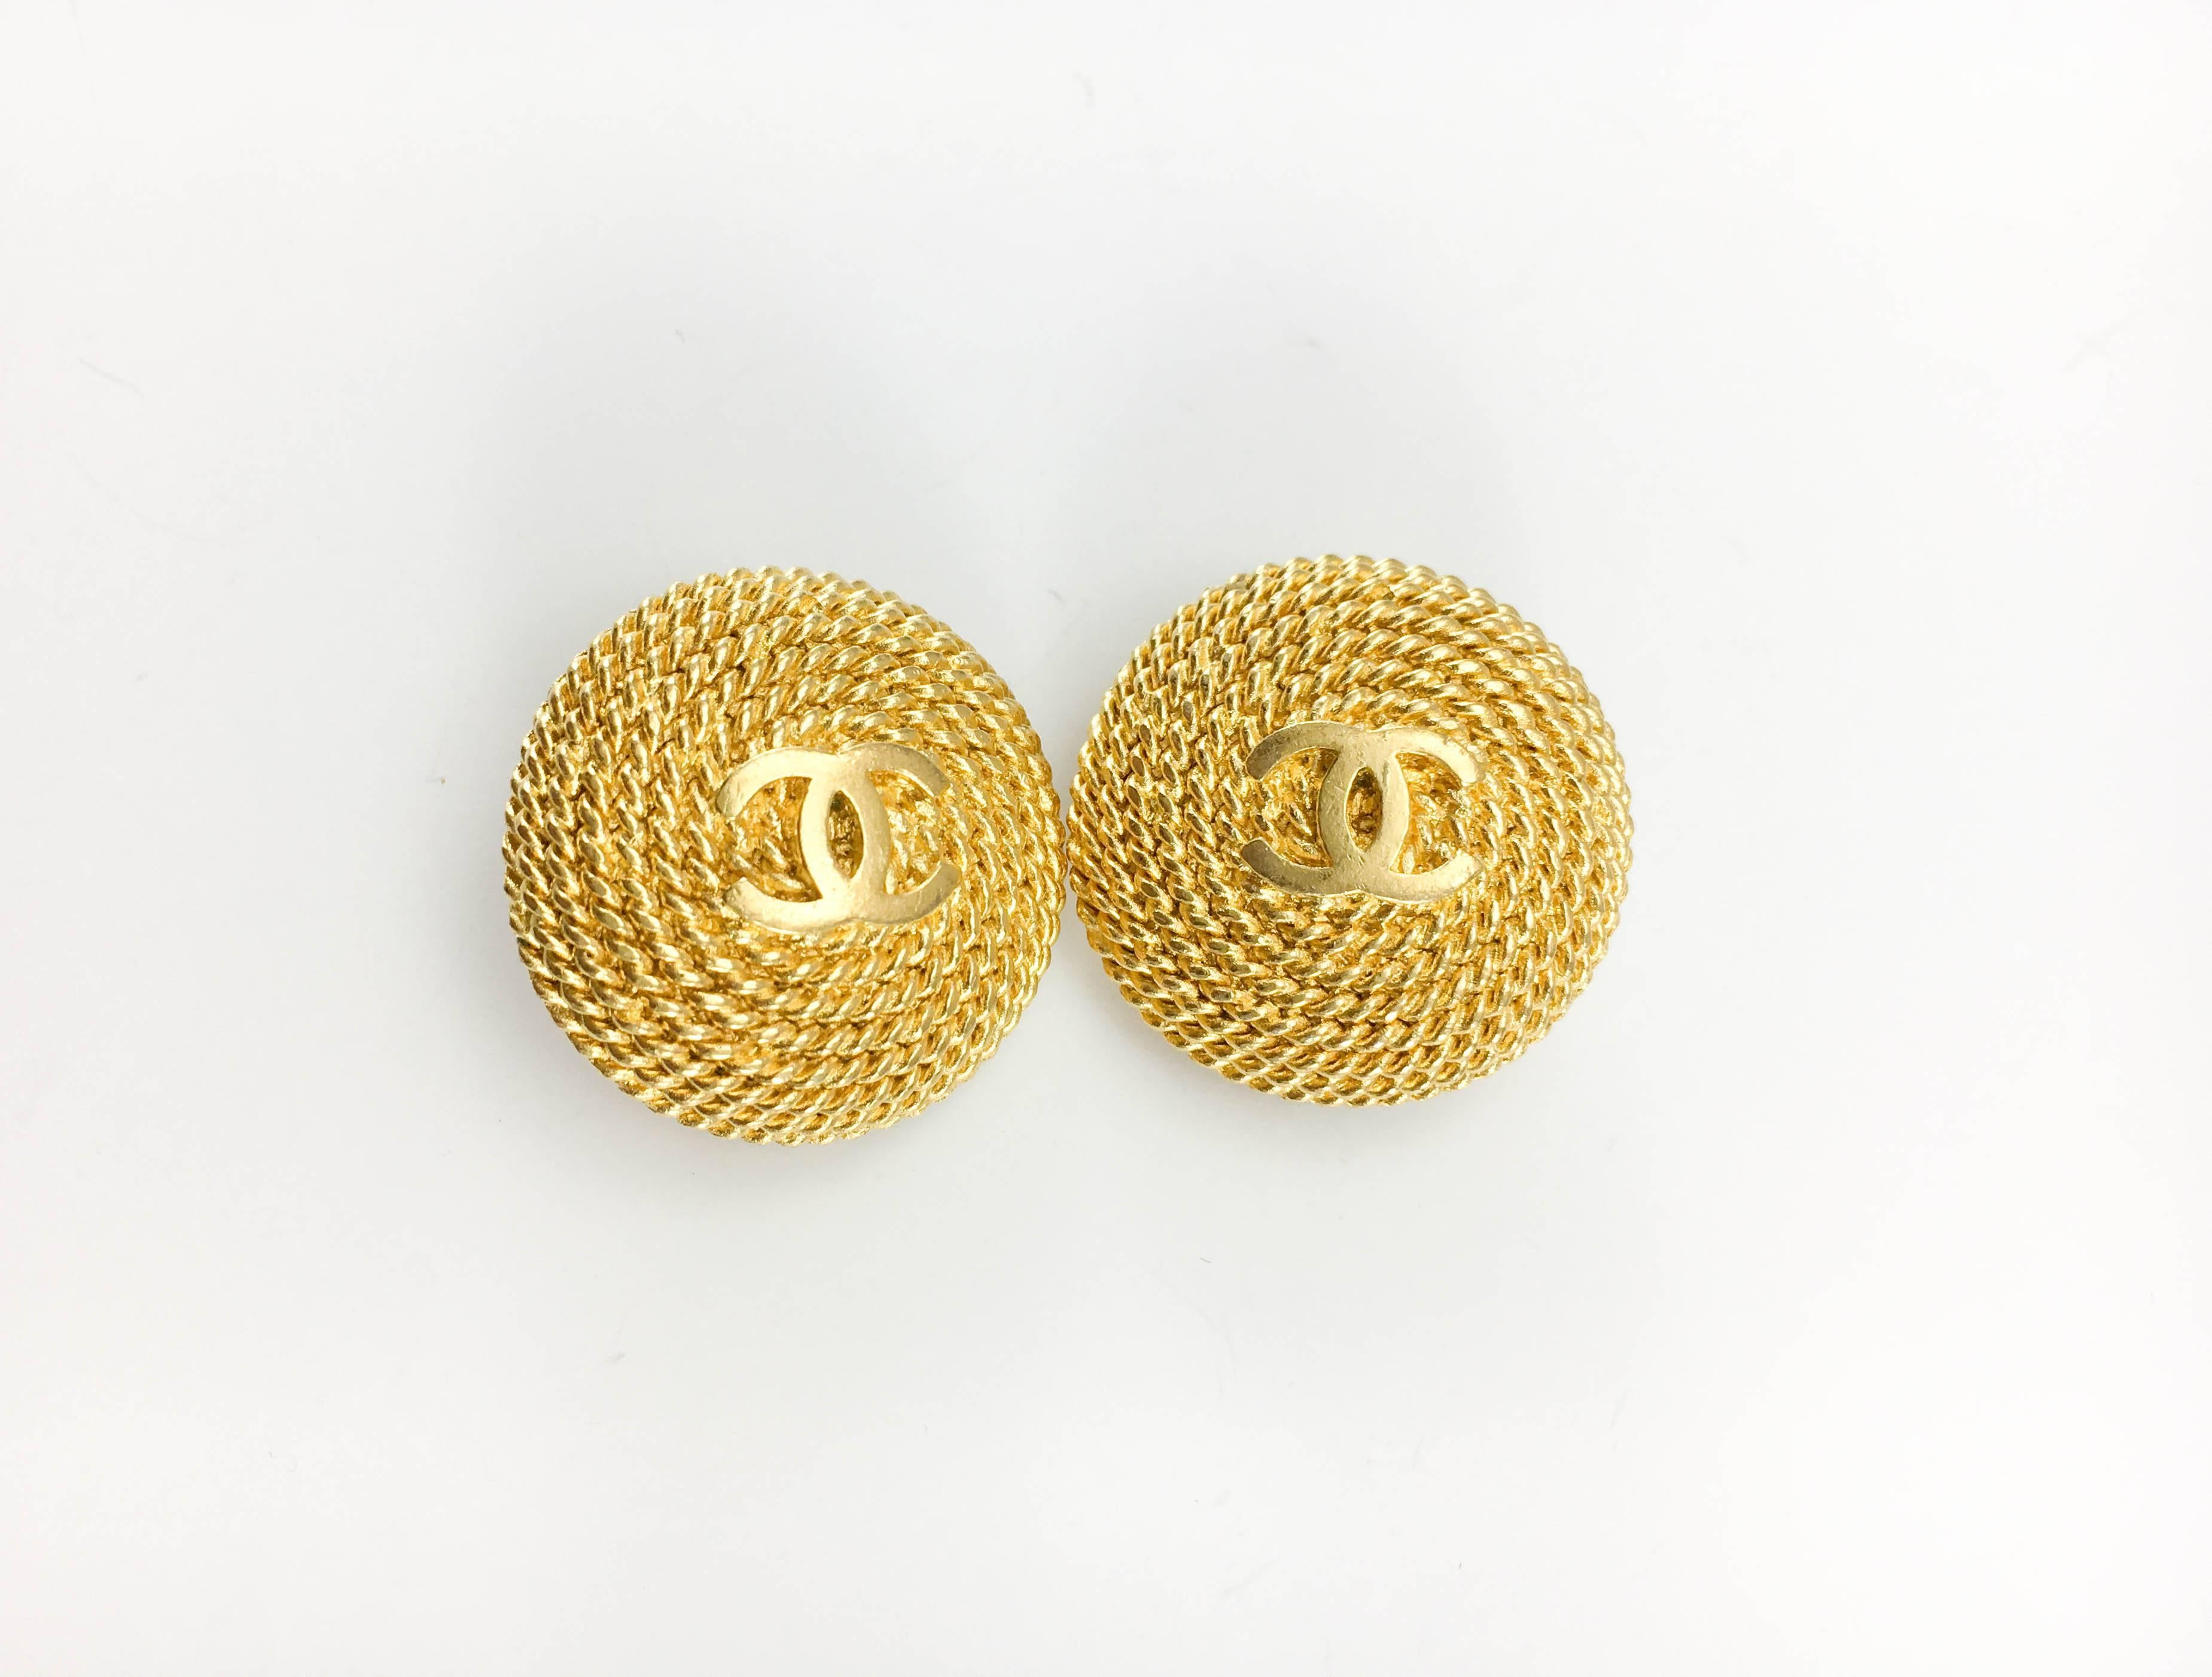 Vintage Chanel Twisted Rope Gold-Plated Clip-On Earrings. These beautiful round earrings by Chanel are part of the 1995 Autumn / Winter collection. Gold-Plated, the twisted rope design shows the iconic ‘CC’ logo in the centre. Chanel signed on the